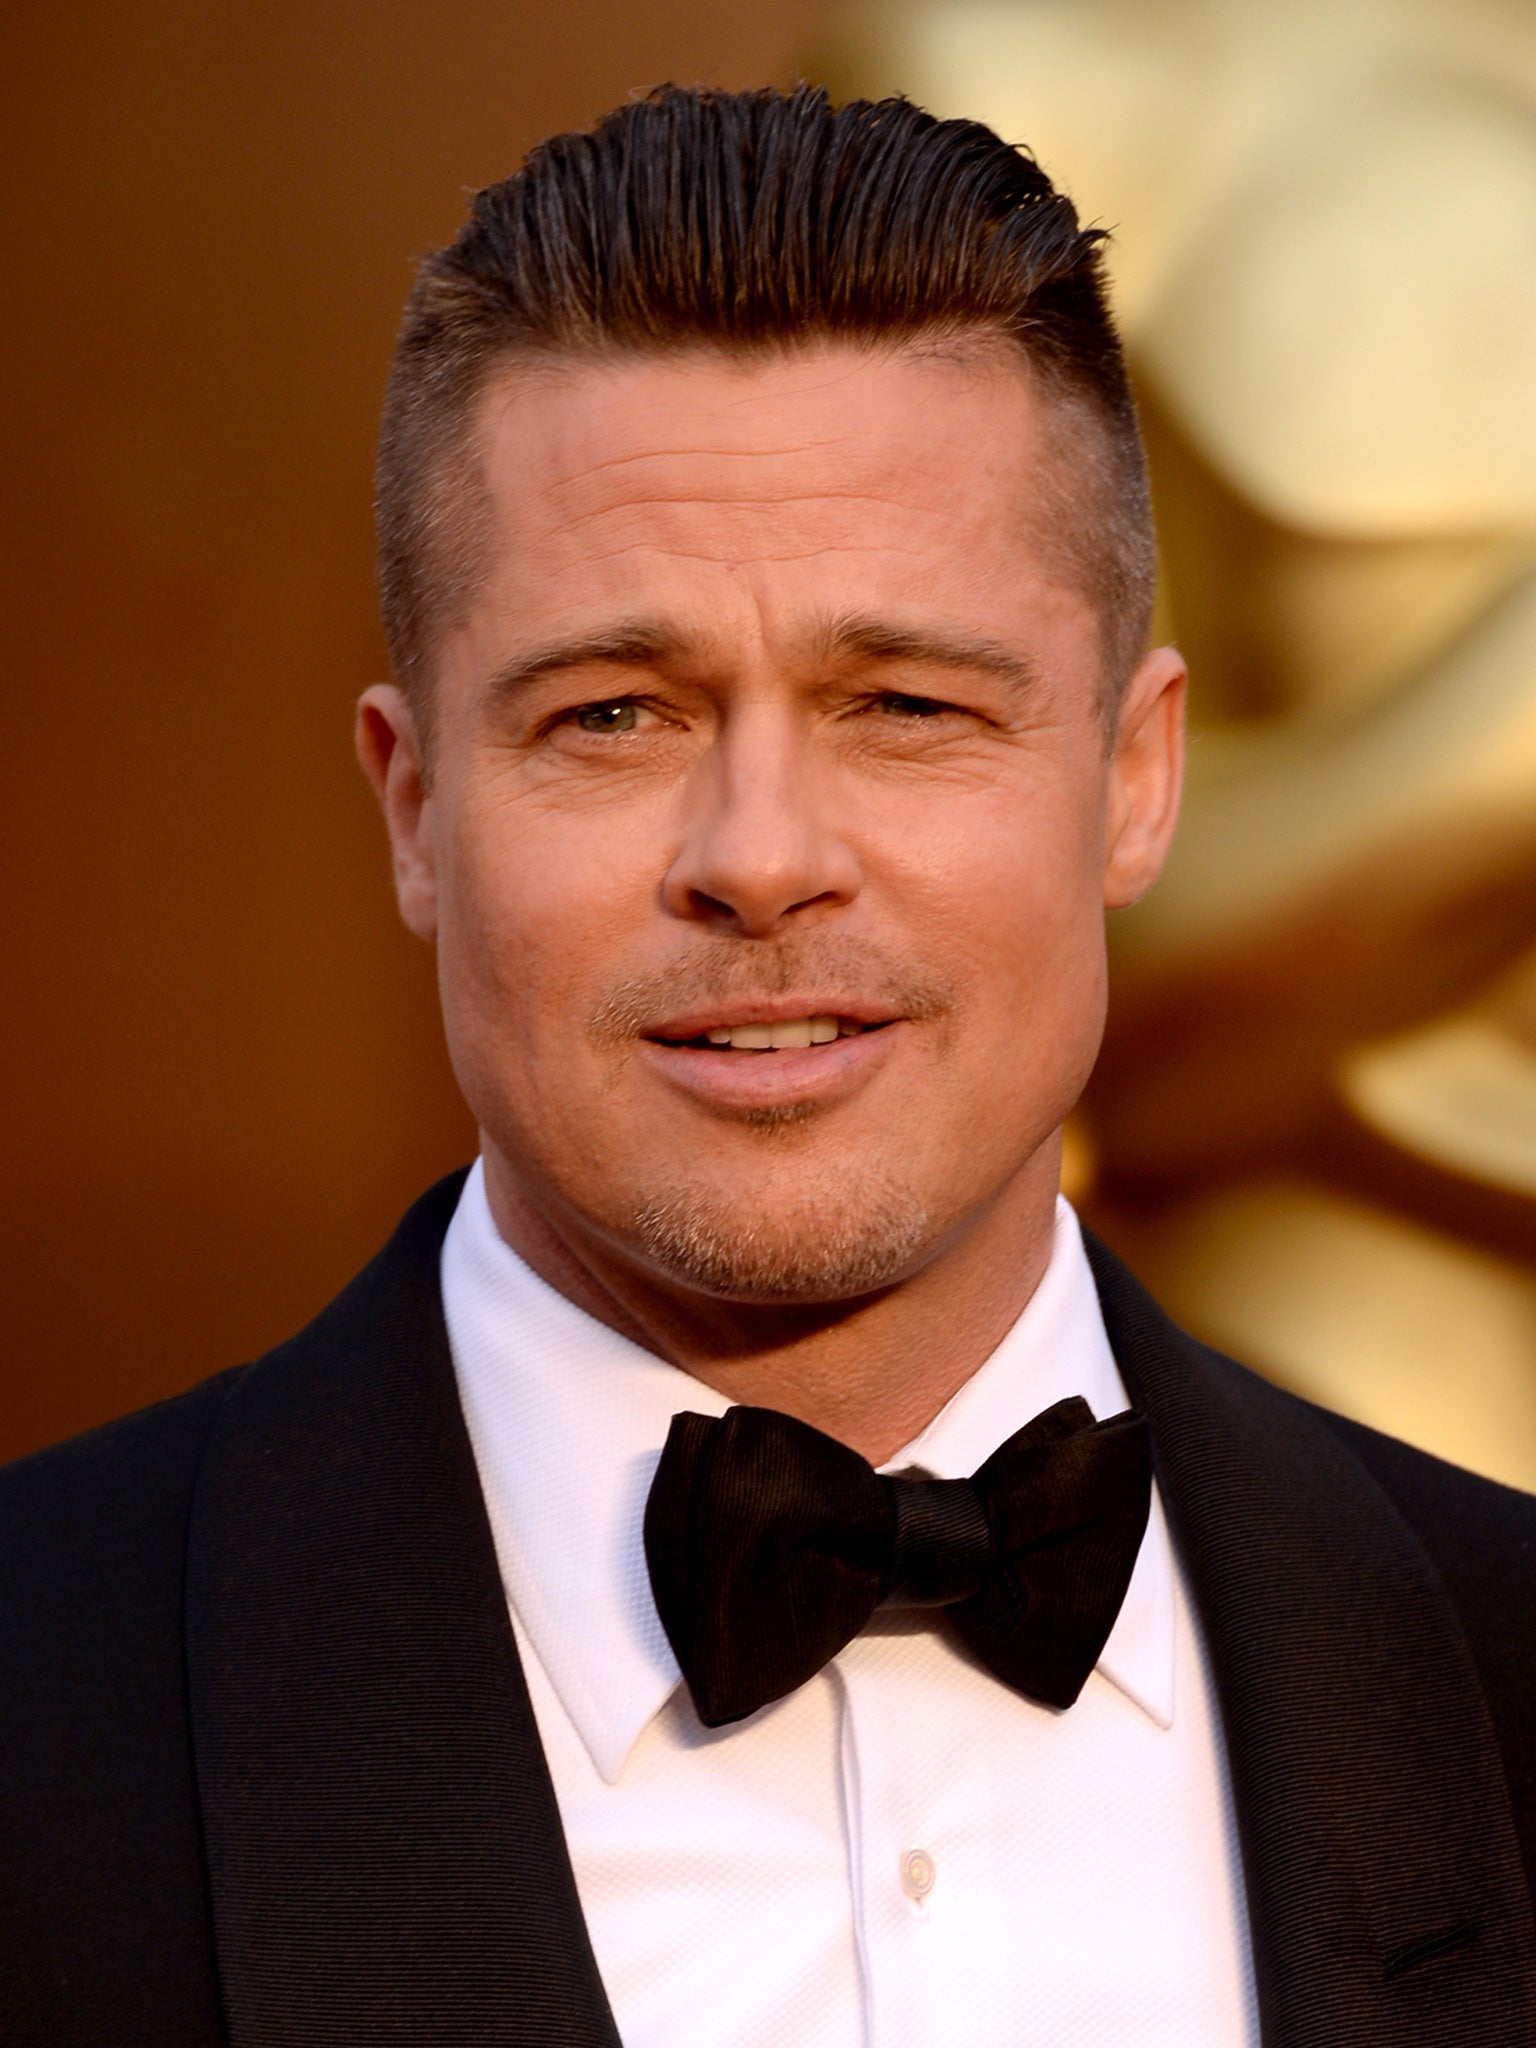 No word on whether Brad Pitt will be shoehorned into a minor role